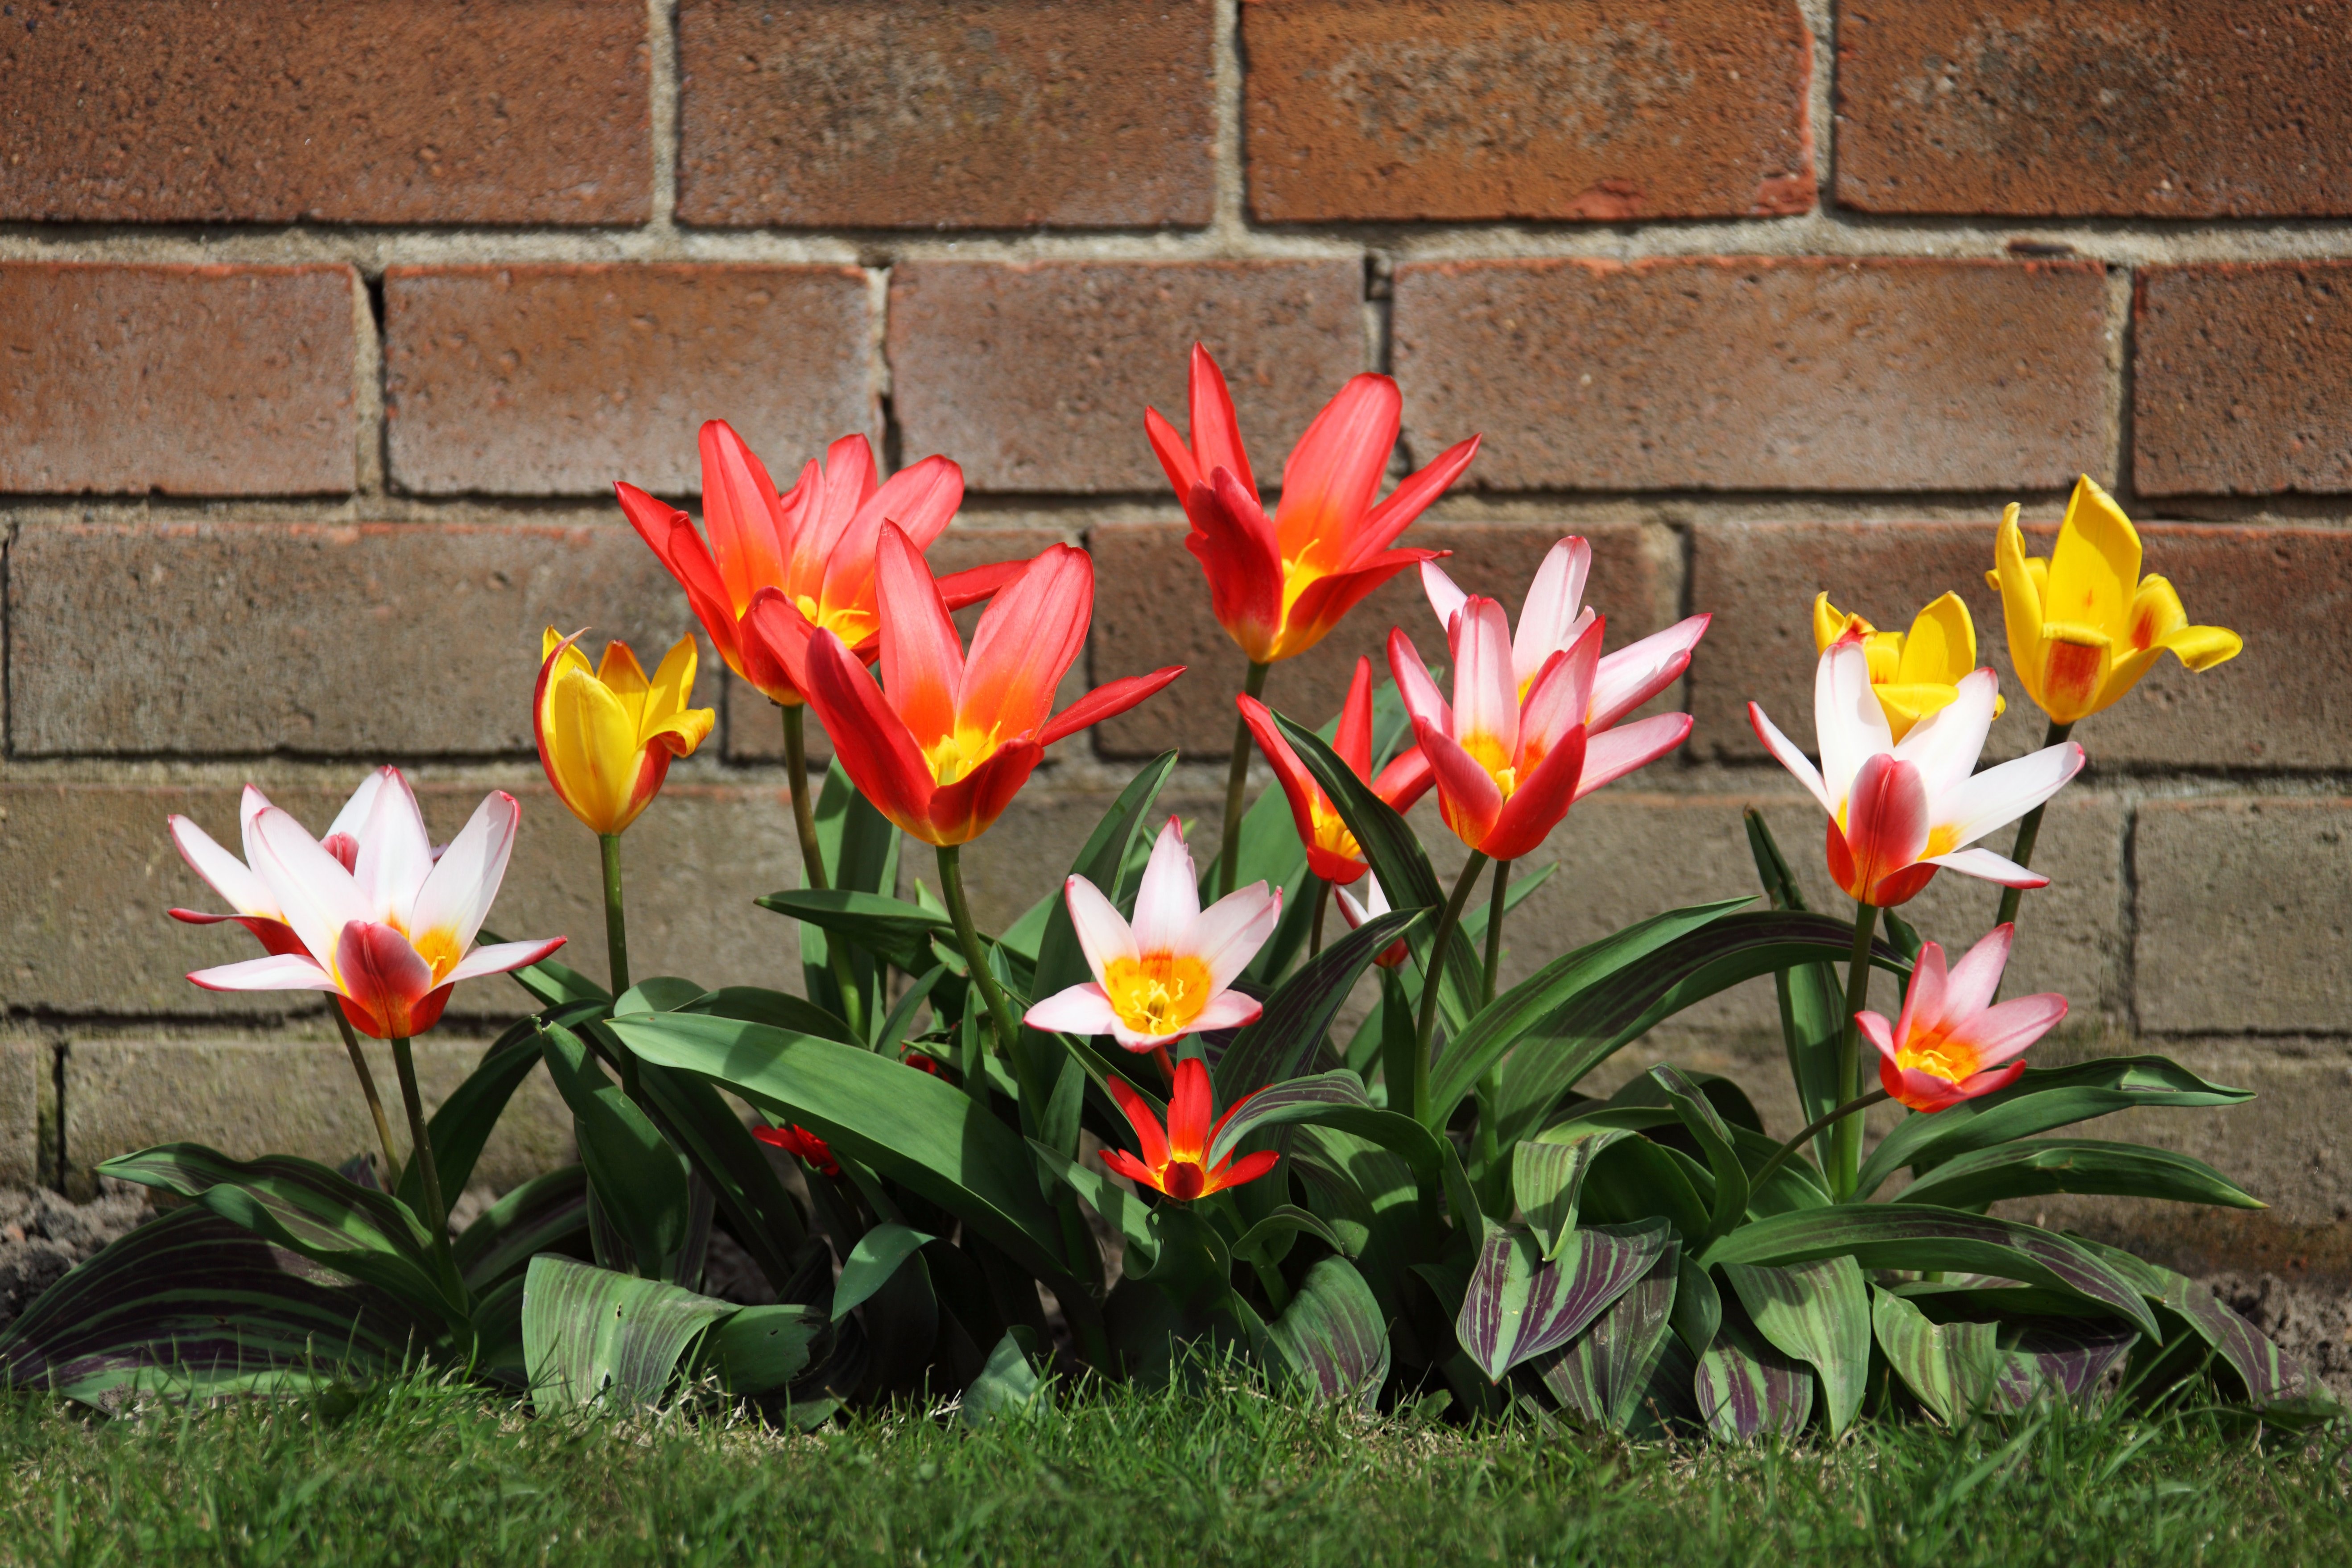 photo of red,white and yellow petaled flower beside a brick wall placed on green grass field